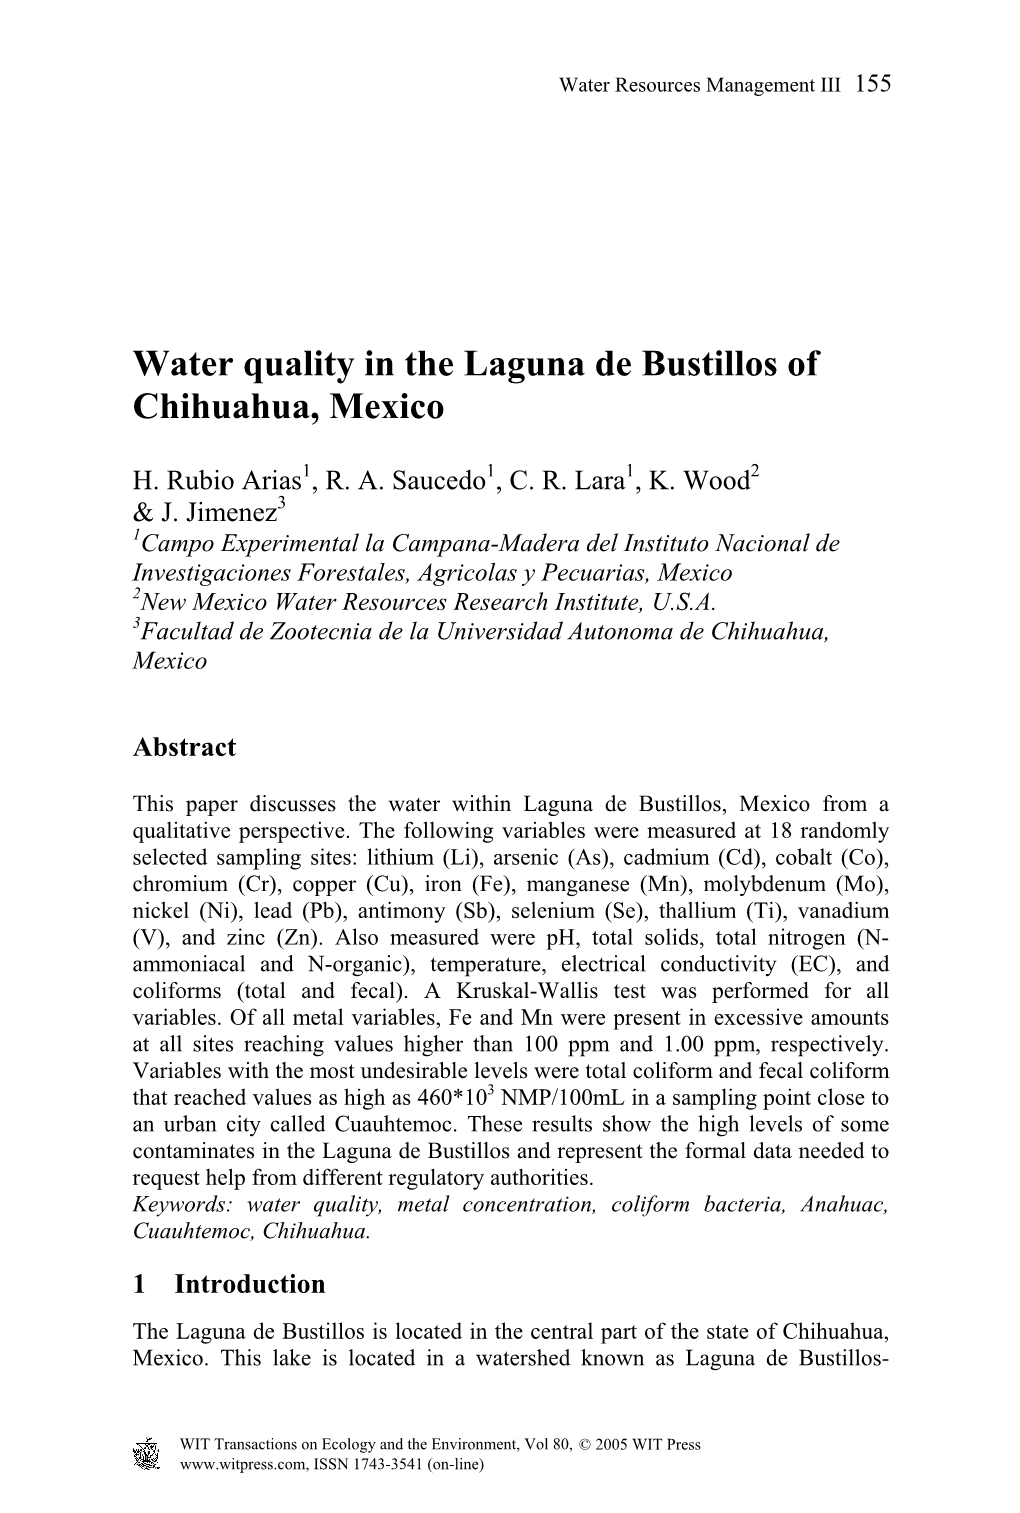 Water Quality in the Laguna De Bustillos of Chihuahua, Mexico